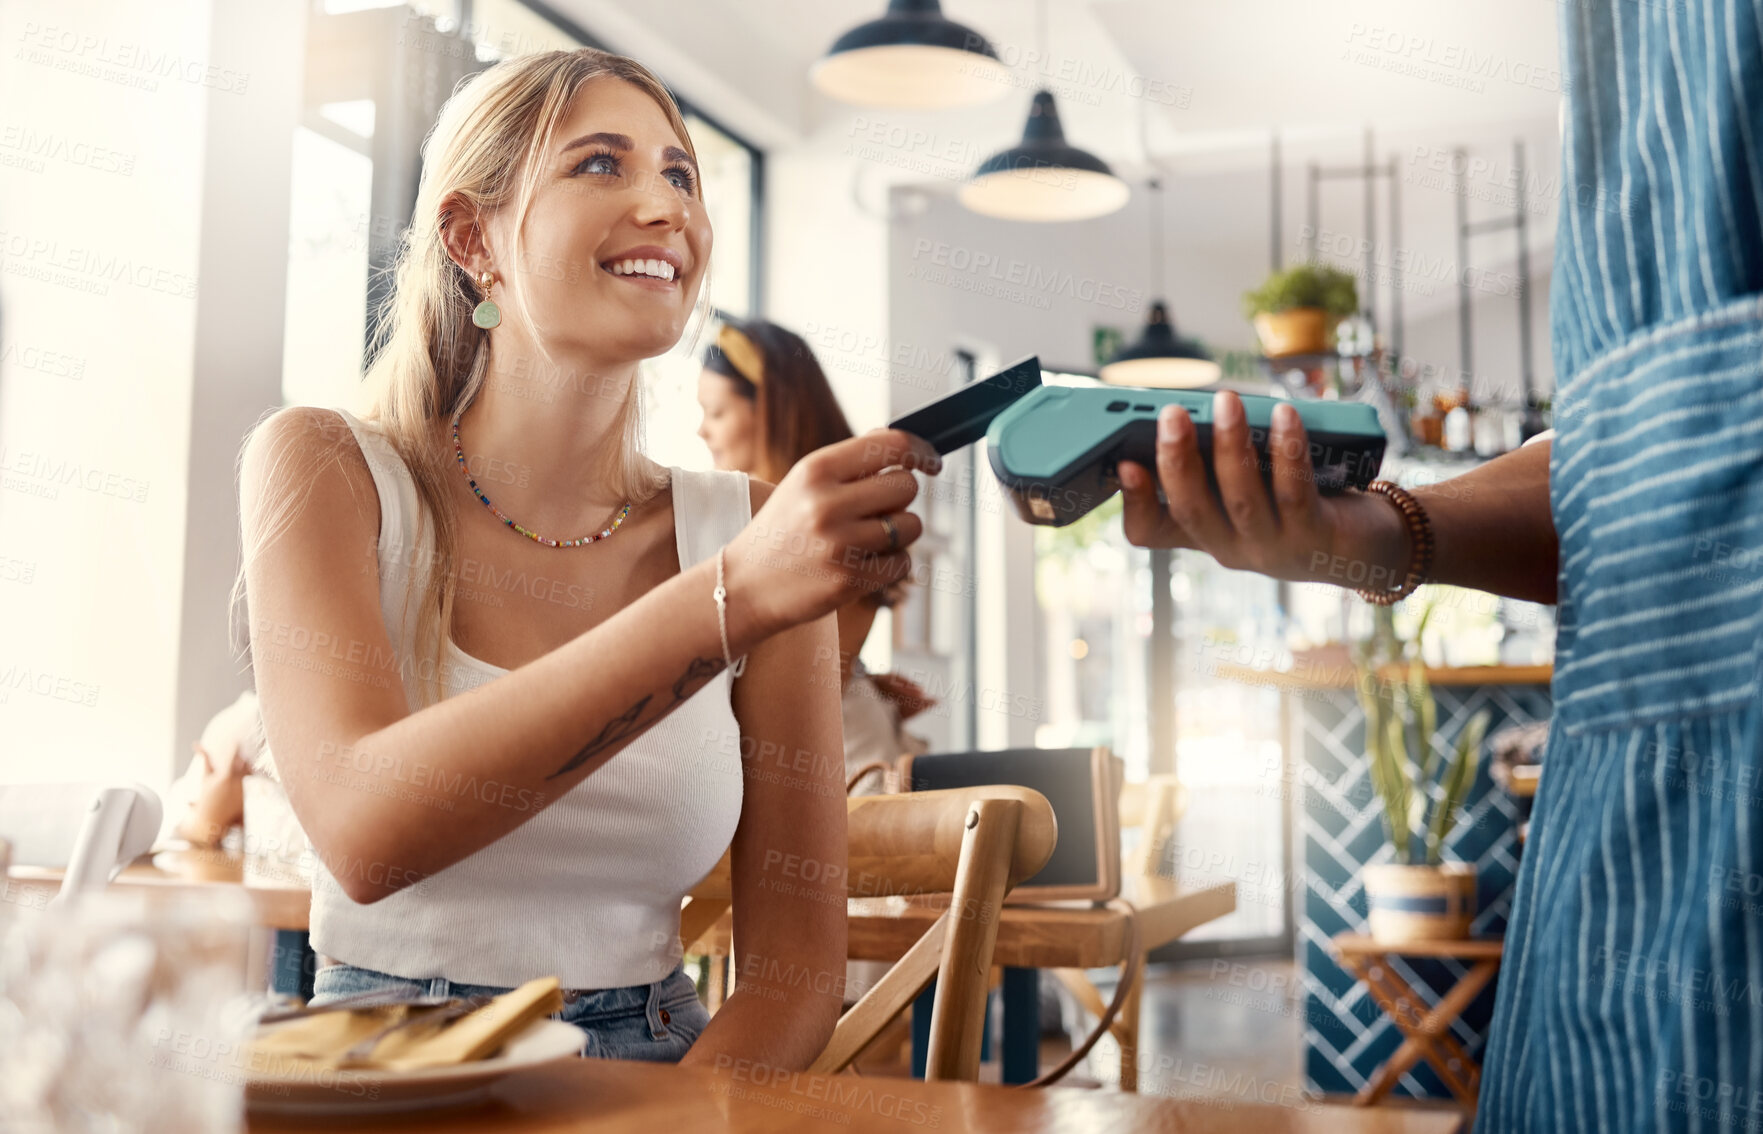 Buy stock photo Shot of a young woman making a card payment using a nfc machine